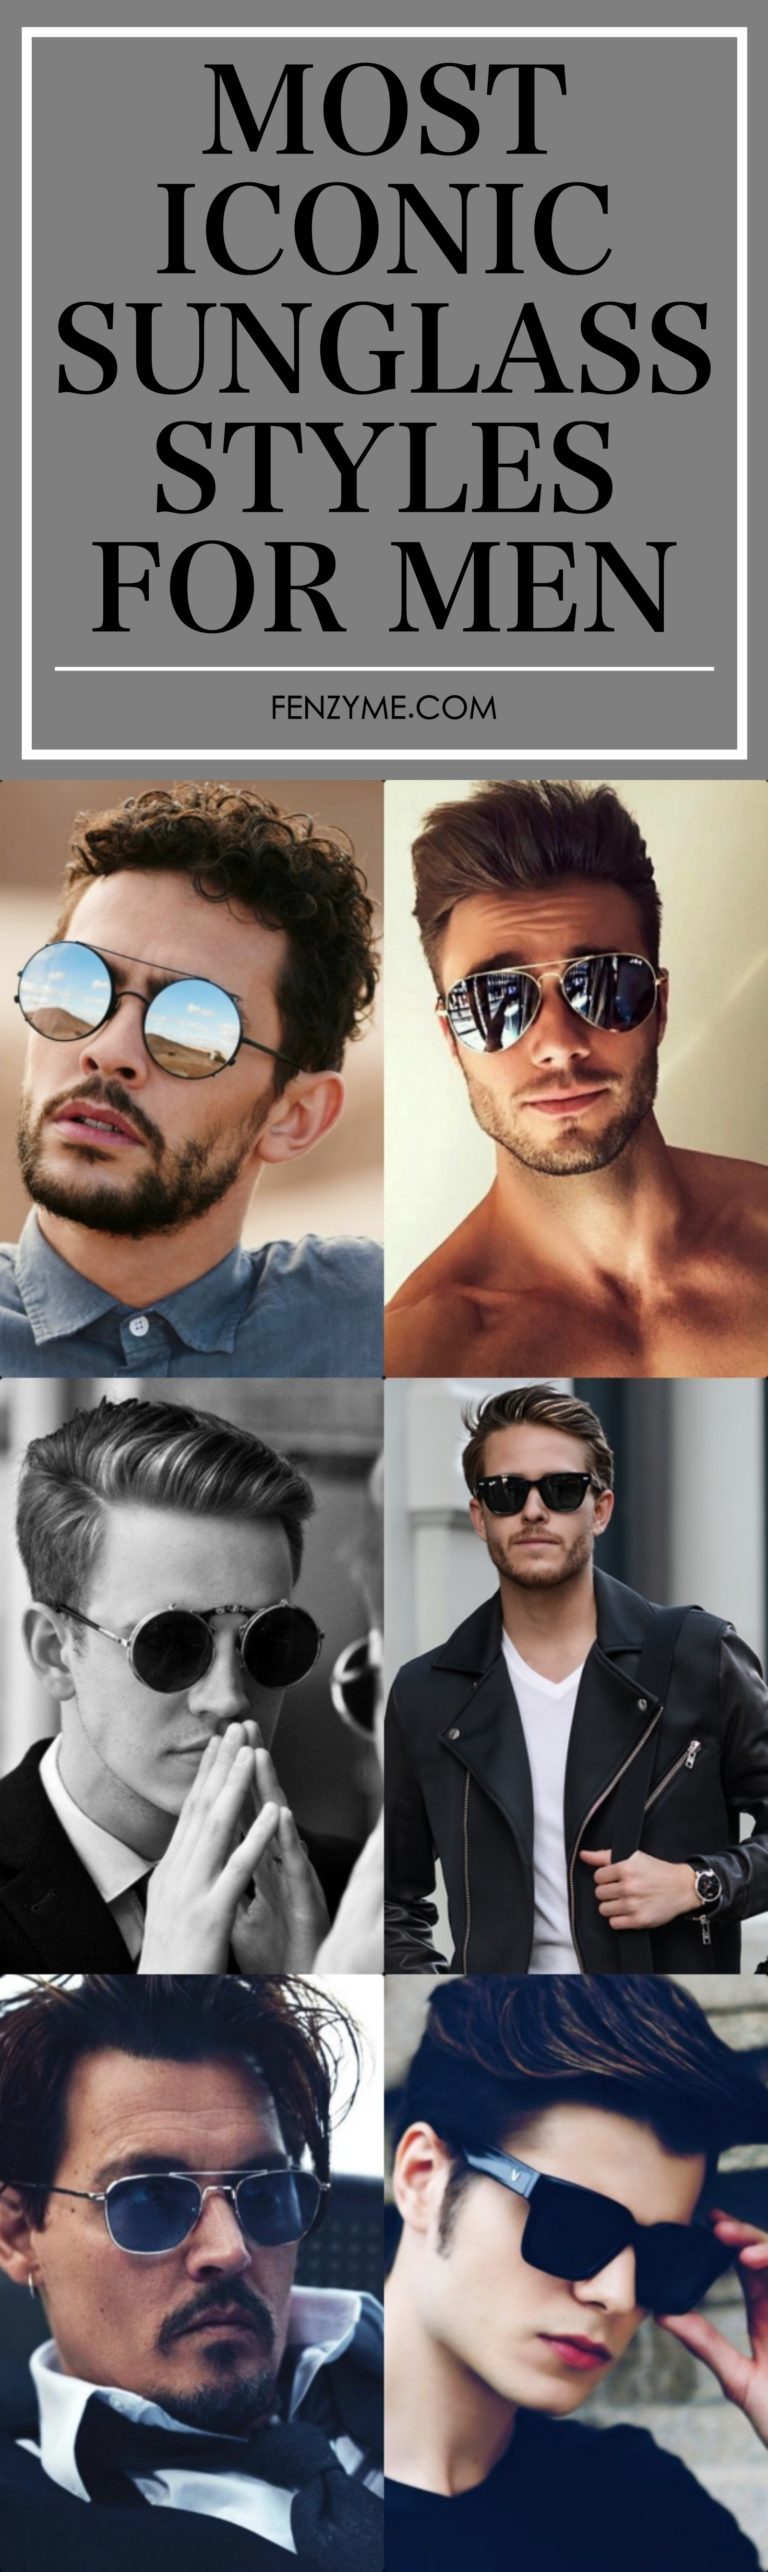 9 Of The Most Iconic Sunglass Styles For Men Fashion Enzyme 